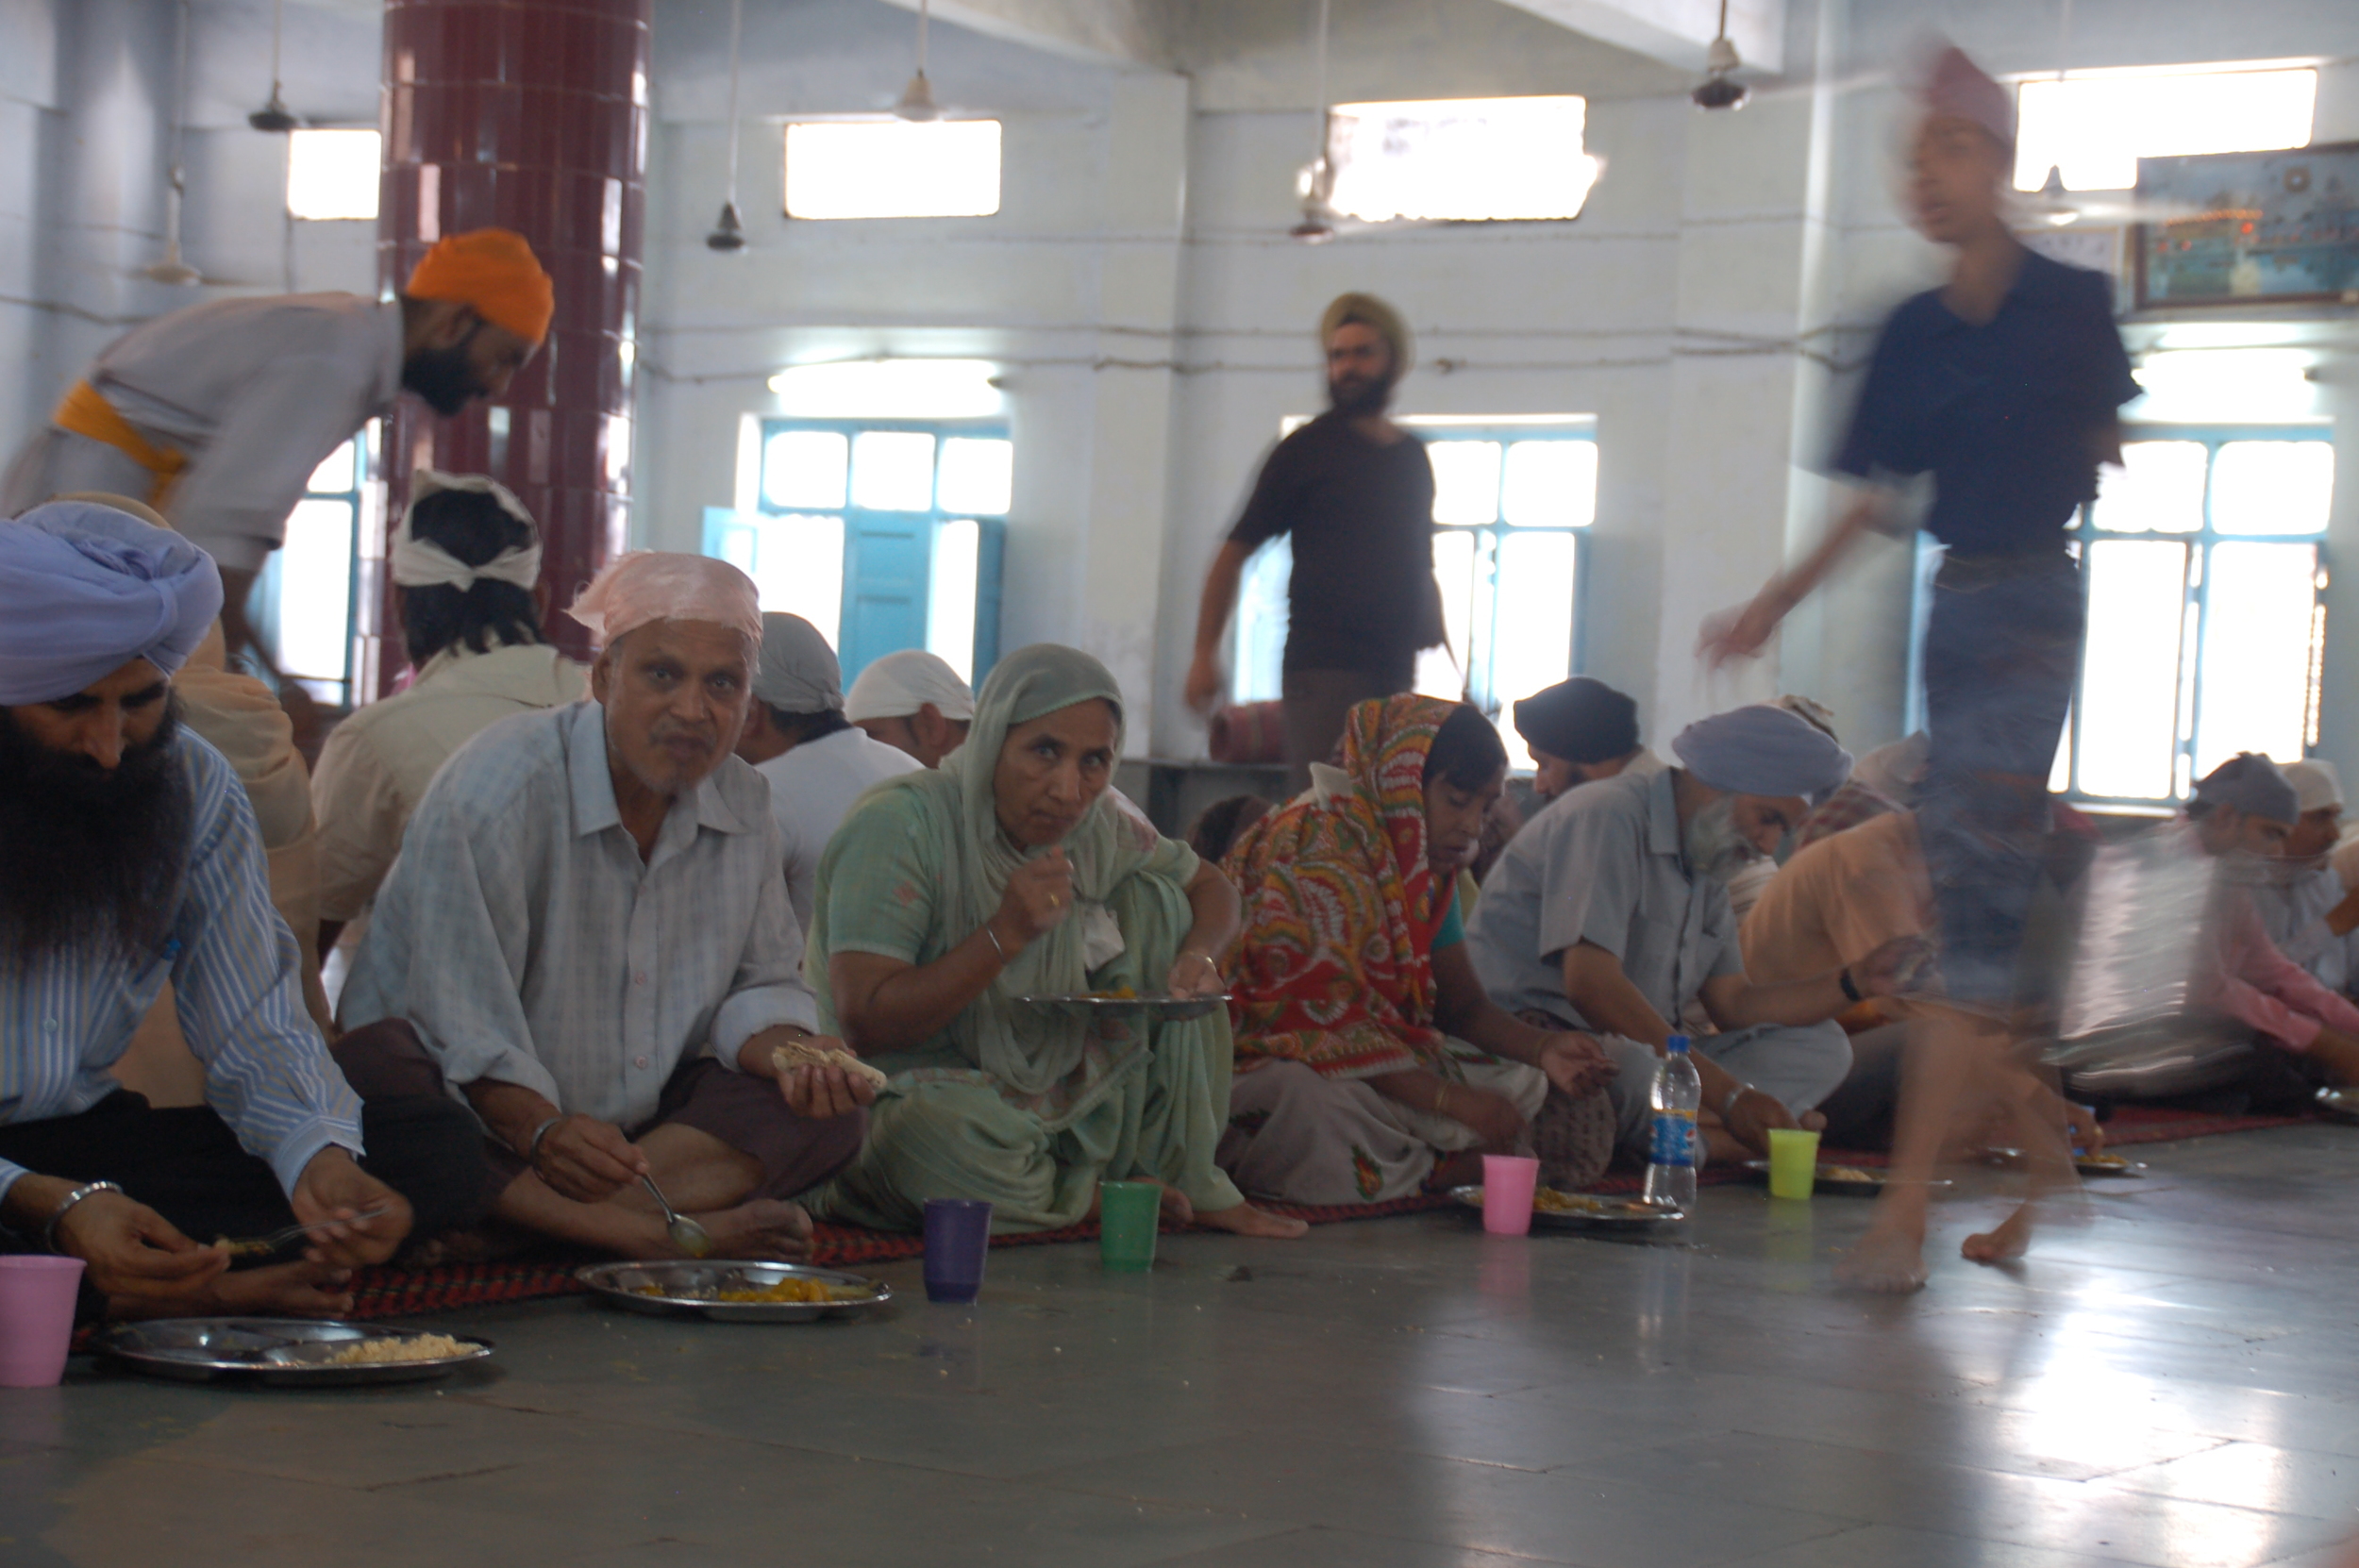 Eating Breakfast in a Sikh Temple